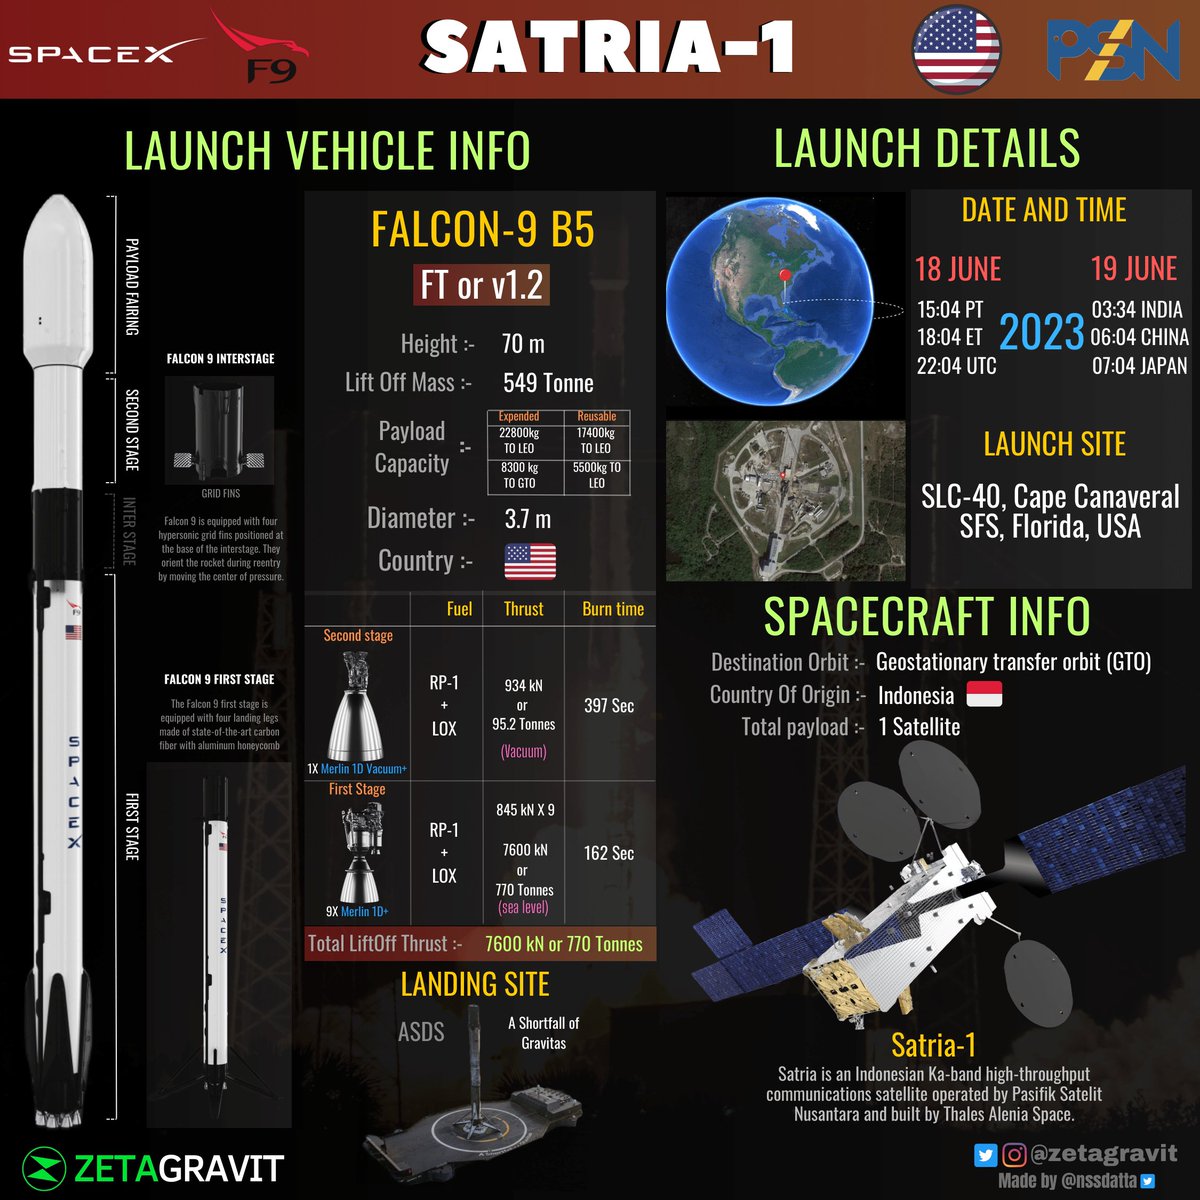 SpaceX Launch Update 📢 

Satria is an Indonesian communications satellite operated by @PSNengage to be Launched into GTO onboard #SpaceX's #Falcon9

The launch is on Saturday, June-19  03:34 Pm IST/ June-18 22:04 UTC from #CapeCanaveral SLC-40, Florida, USA

Follow @zetagravit